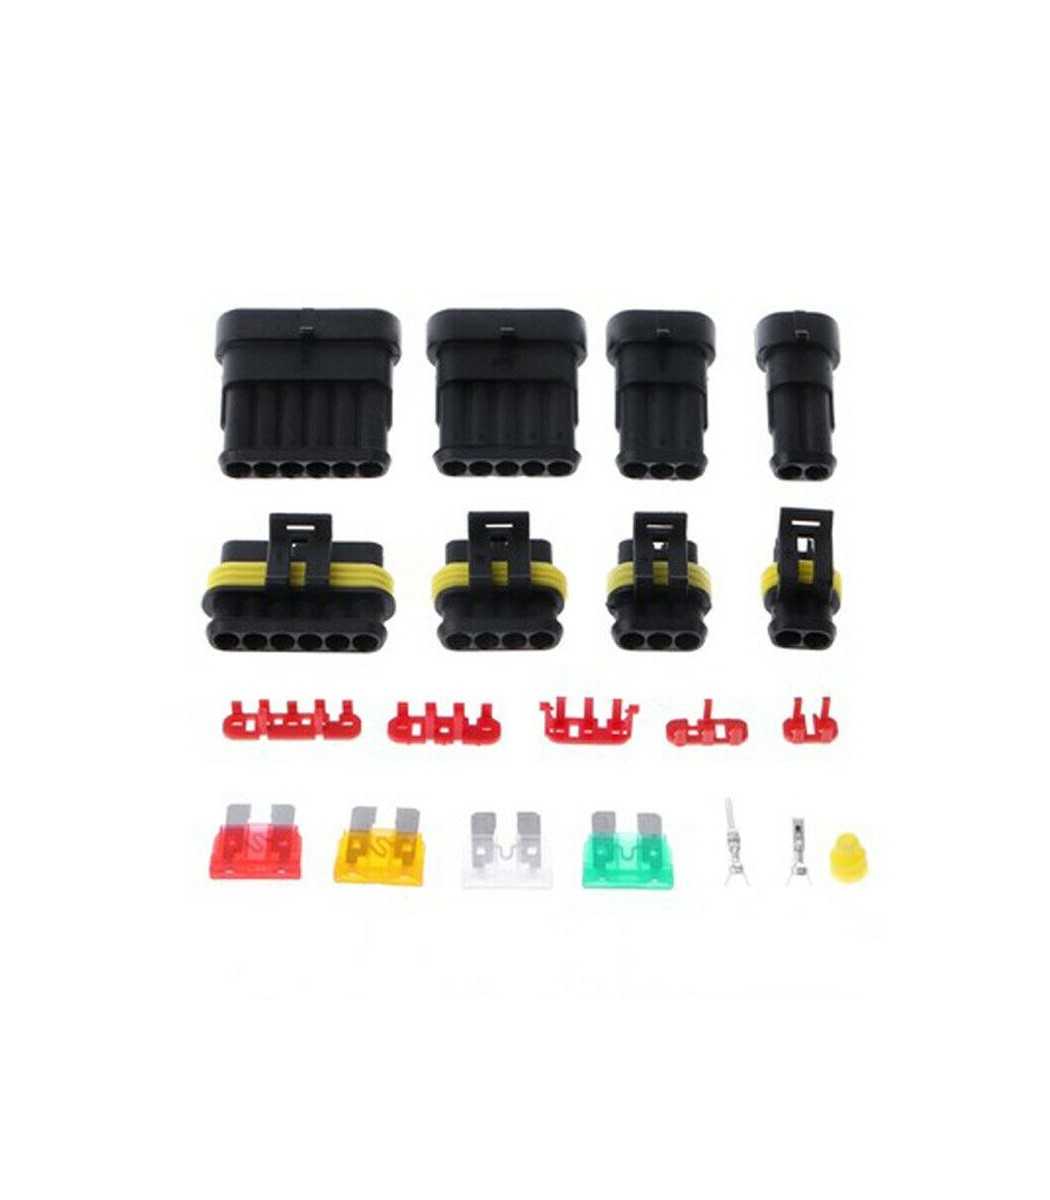 240pcs Pin Car Electrical Wire Waterproof Connector Plug Cable Terminal Fuse Kit